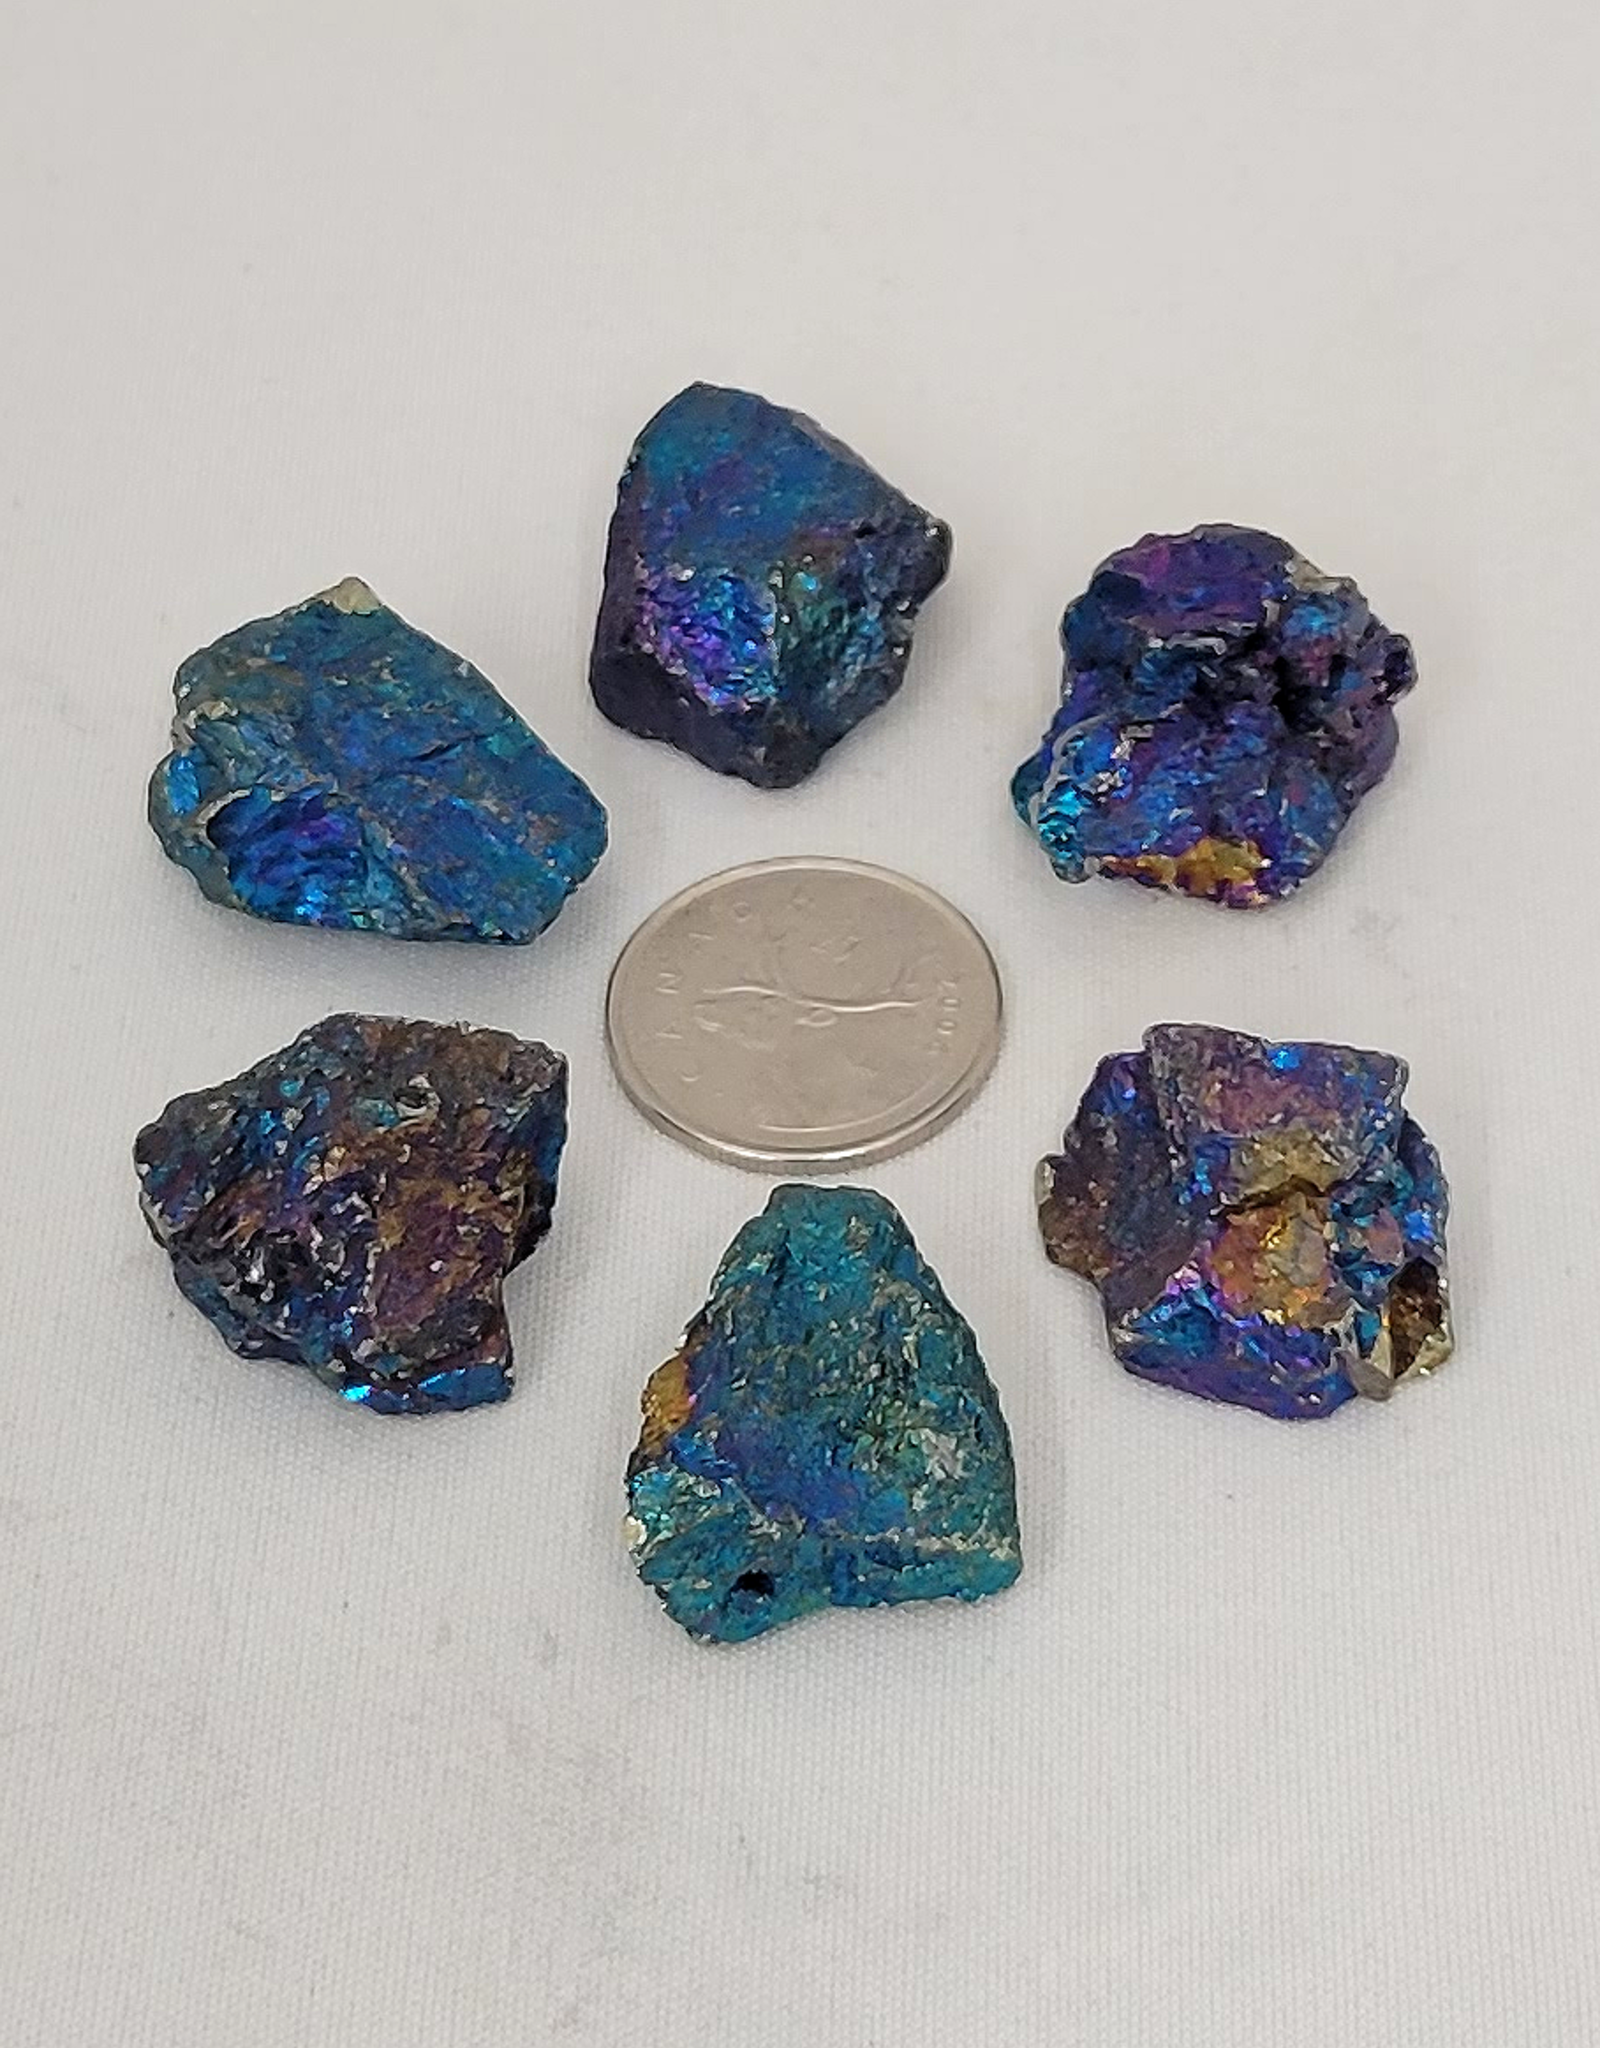 Chalcopyrite Chips Raw (Peacock Ore) $3